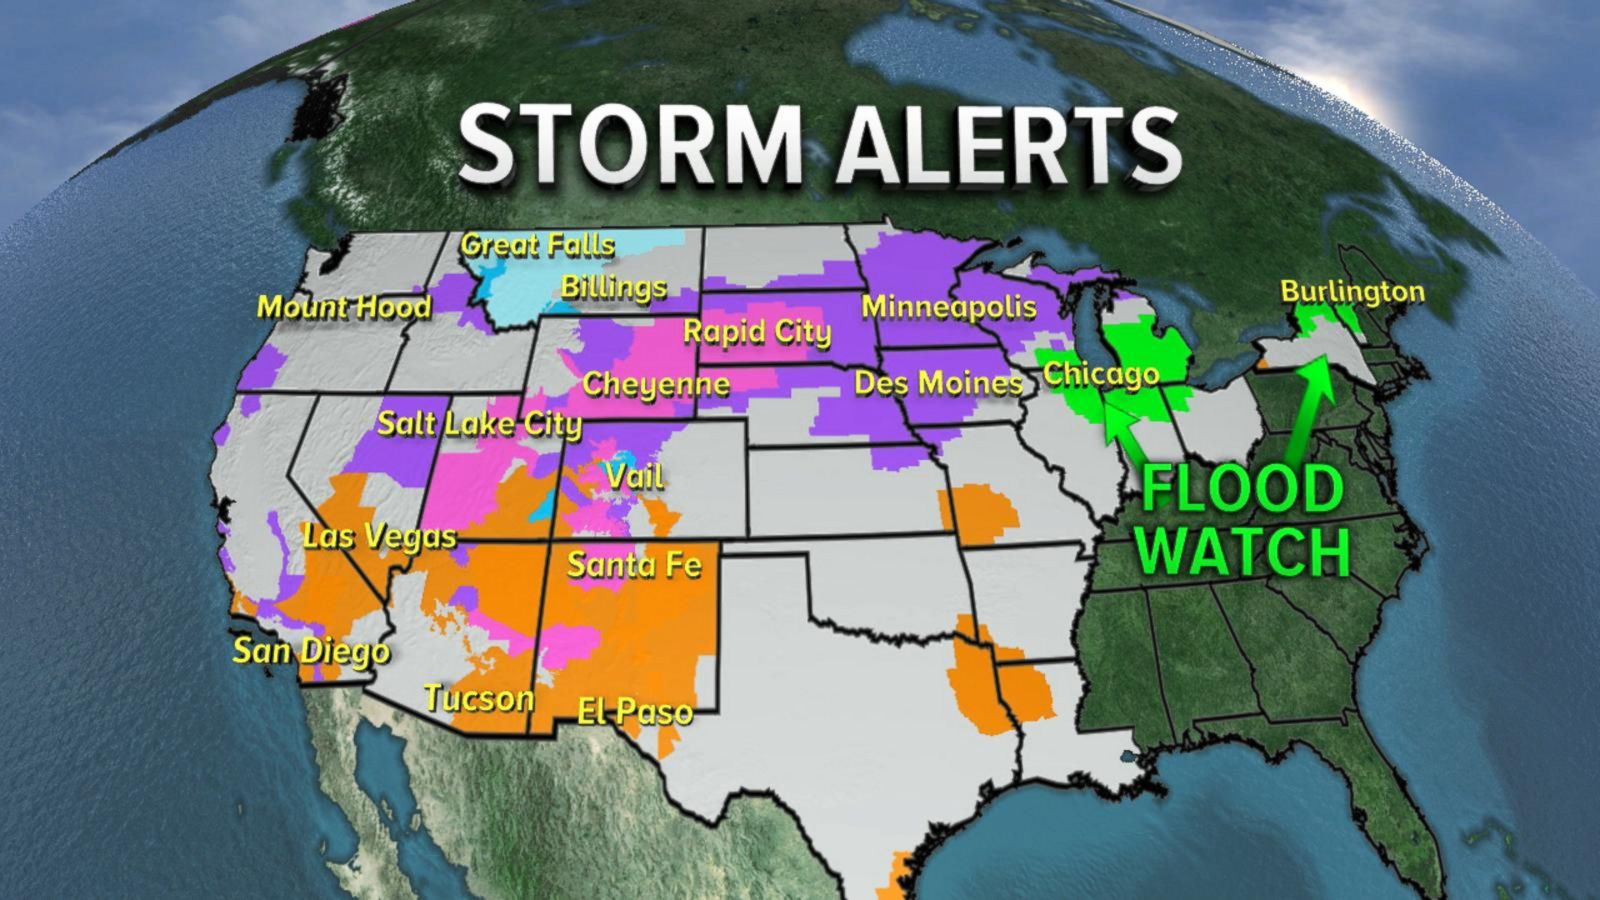 24 states on alert for severe weather conditions - Good Morning America